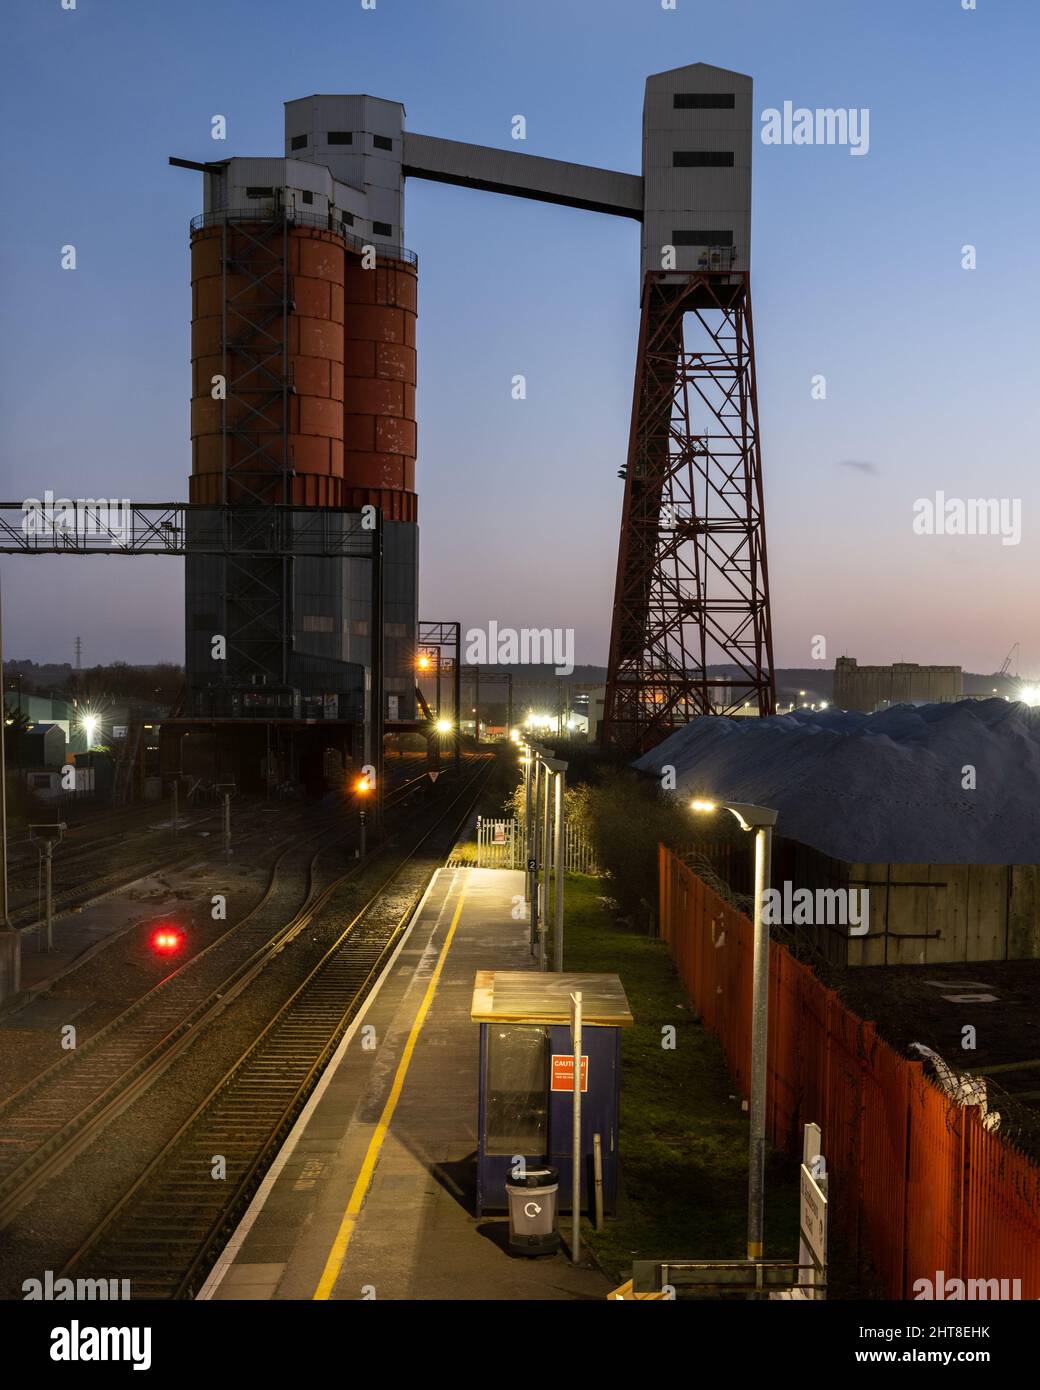 A conveyor elevator and silos for loading coal trains stands over railway tracks at St Andrew's Road station in Avonmouth, Bristol. Stock Photo